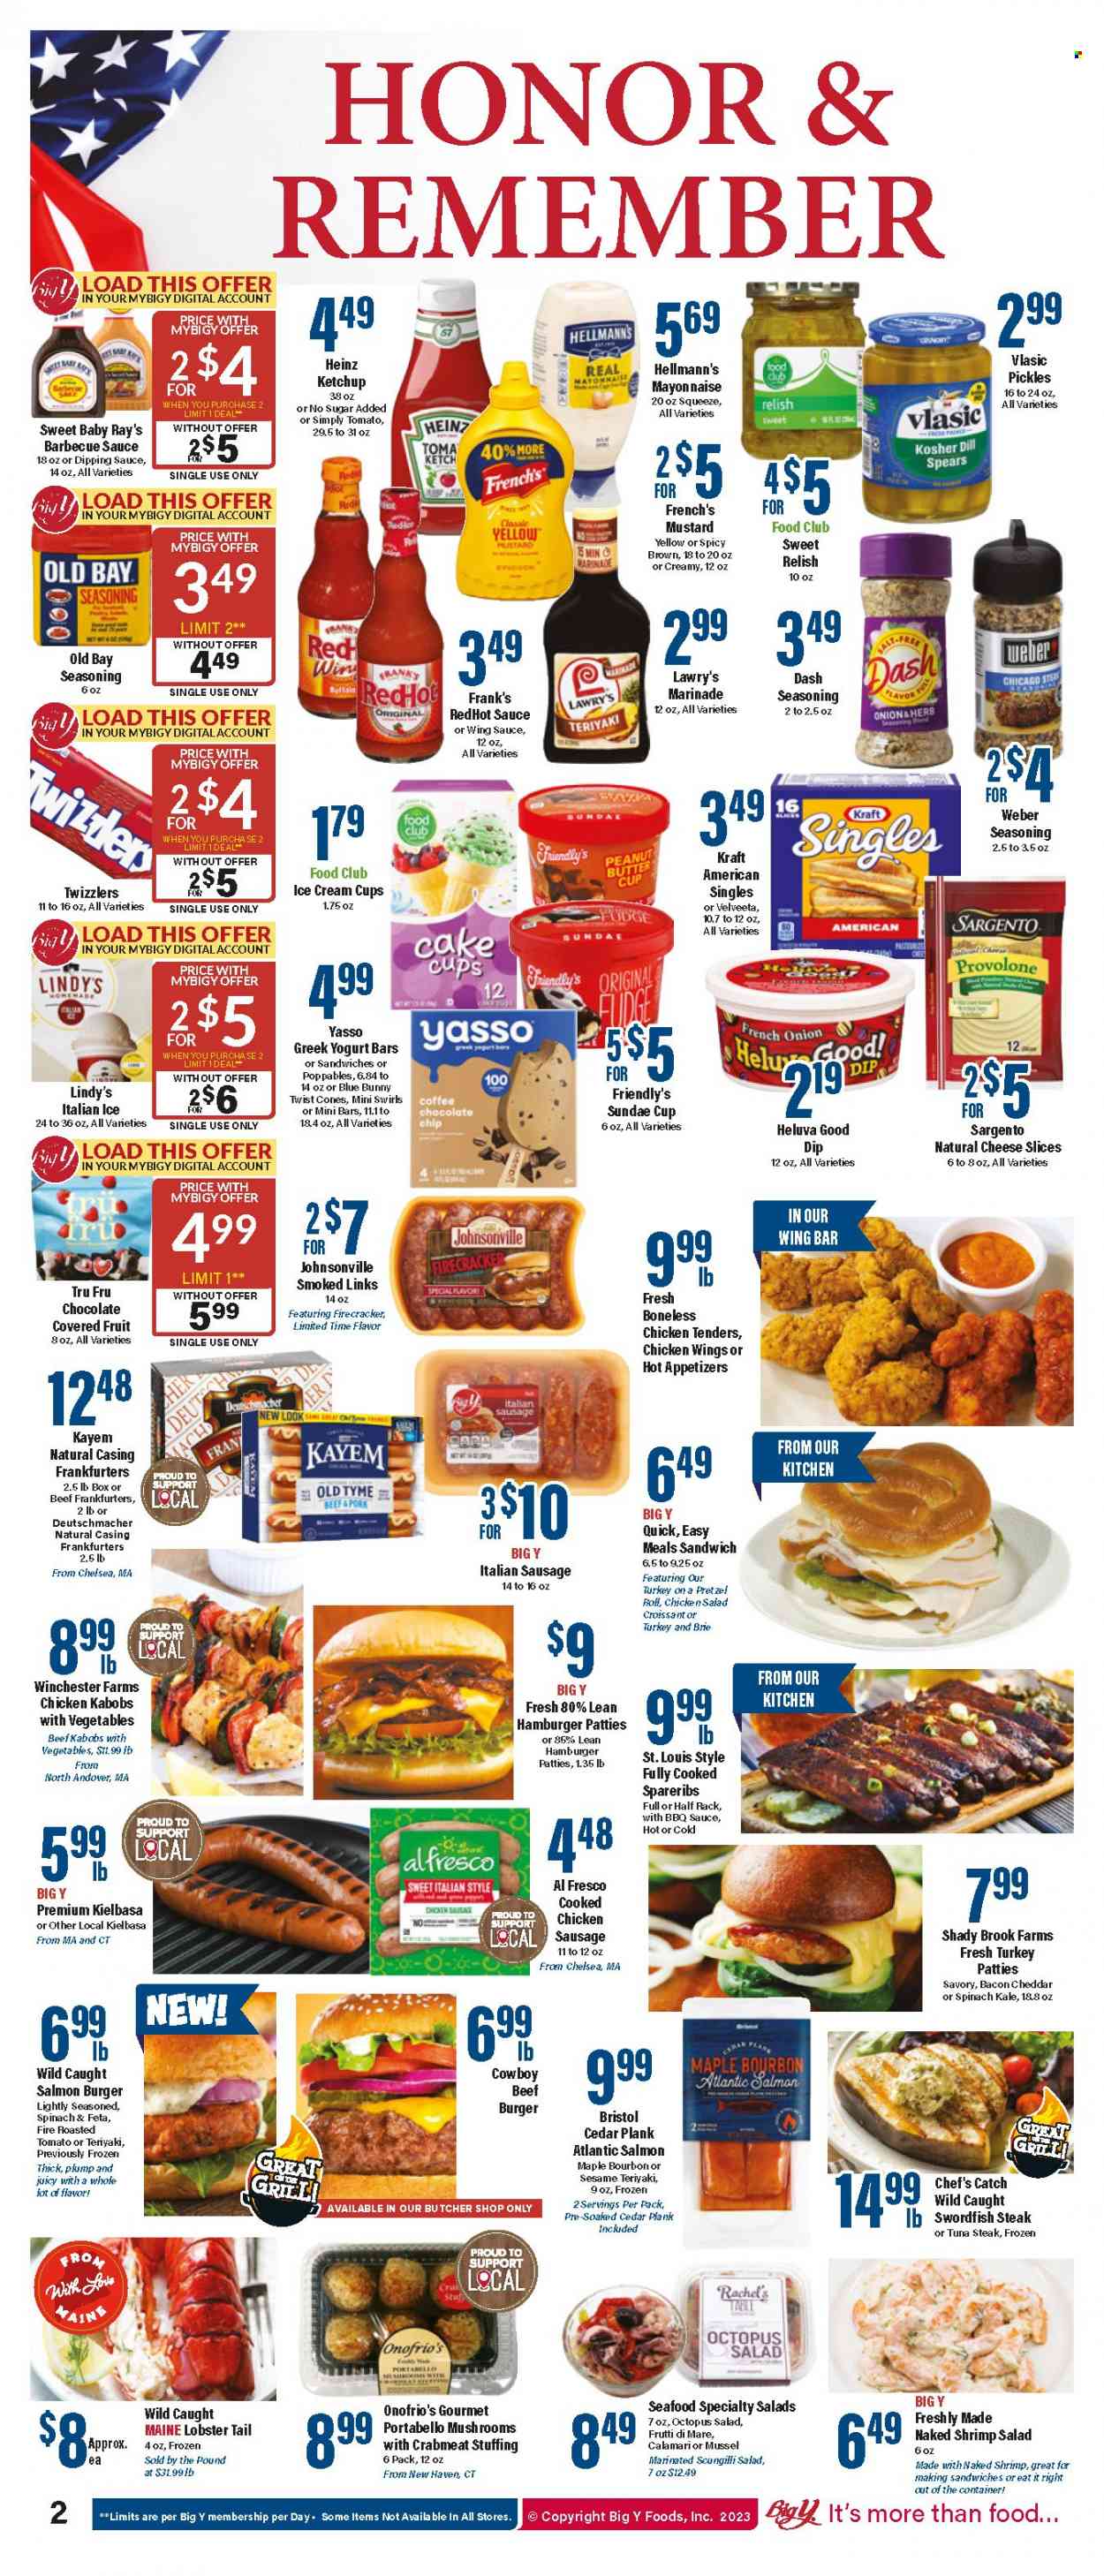 thumbnail - Big Y Flyer - 05/25/2023 - 05/31/2023 - Sales products - mushrooms, pretzels, cake, croissant, kale, onion, calamari, crab meat, lobster, mussels, swordfish, tuna, octopus, seafood, lobster tail, shrimps, chicken tenders, sandwich, hamburger, sauce, beef burger, Kraft®, ready meal, bacon, Johnsonville, sausage, chicken sausage, italian sausage, kielbasa, frankfurters, chicken salad, sliced cheese, cheddar, cheese, brie, Kraft Singles, Provolone, Sargento, greek yoghurt, mayonnaise, dip, Hellmann’s, ice cream, Friendly's Ice Cream, Blue Bunny, chicken wings, fudge, chocolate chips, peanut butter cups, tuna steak, Heinz, pickles, dill, spice, BBQ sauce, mustard, ketchup, marinade, wing sauce, peanut butter, coffee, turkey, steak, pork spare ribs. Page 1.